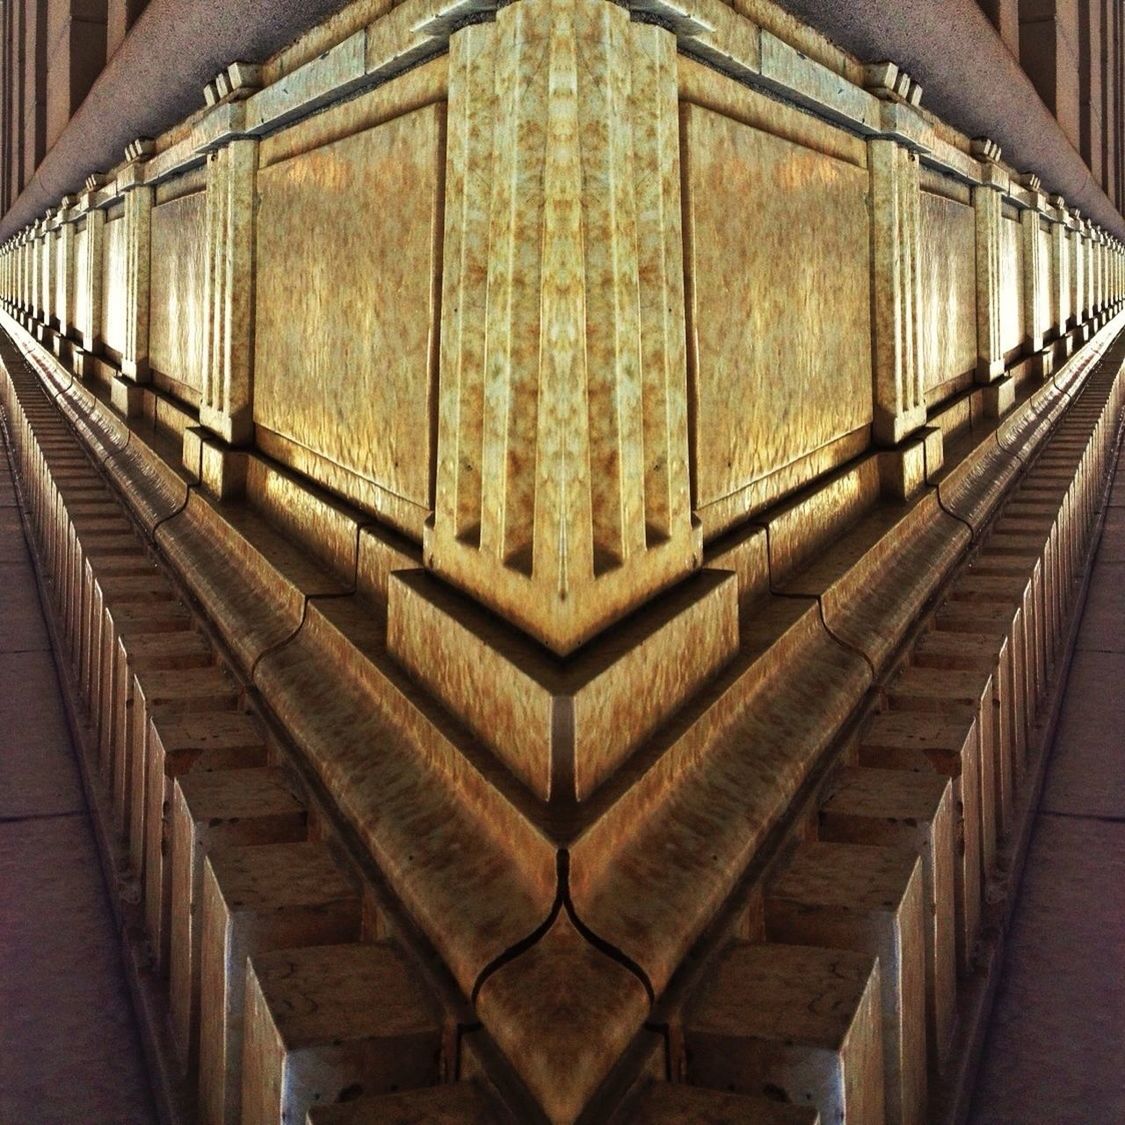 architecture, built structure, the way forward, diminishing perspective, steps, railing, railroad track, steps and staircases, vanishing point, indoors, in a row, staircase, rail transportation, building exterior, railroad station, wall - building feature, day, no people, architectural column, railroad station platform